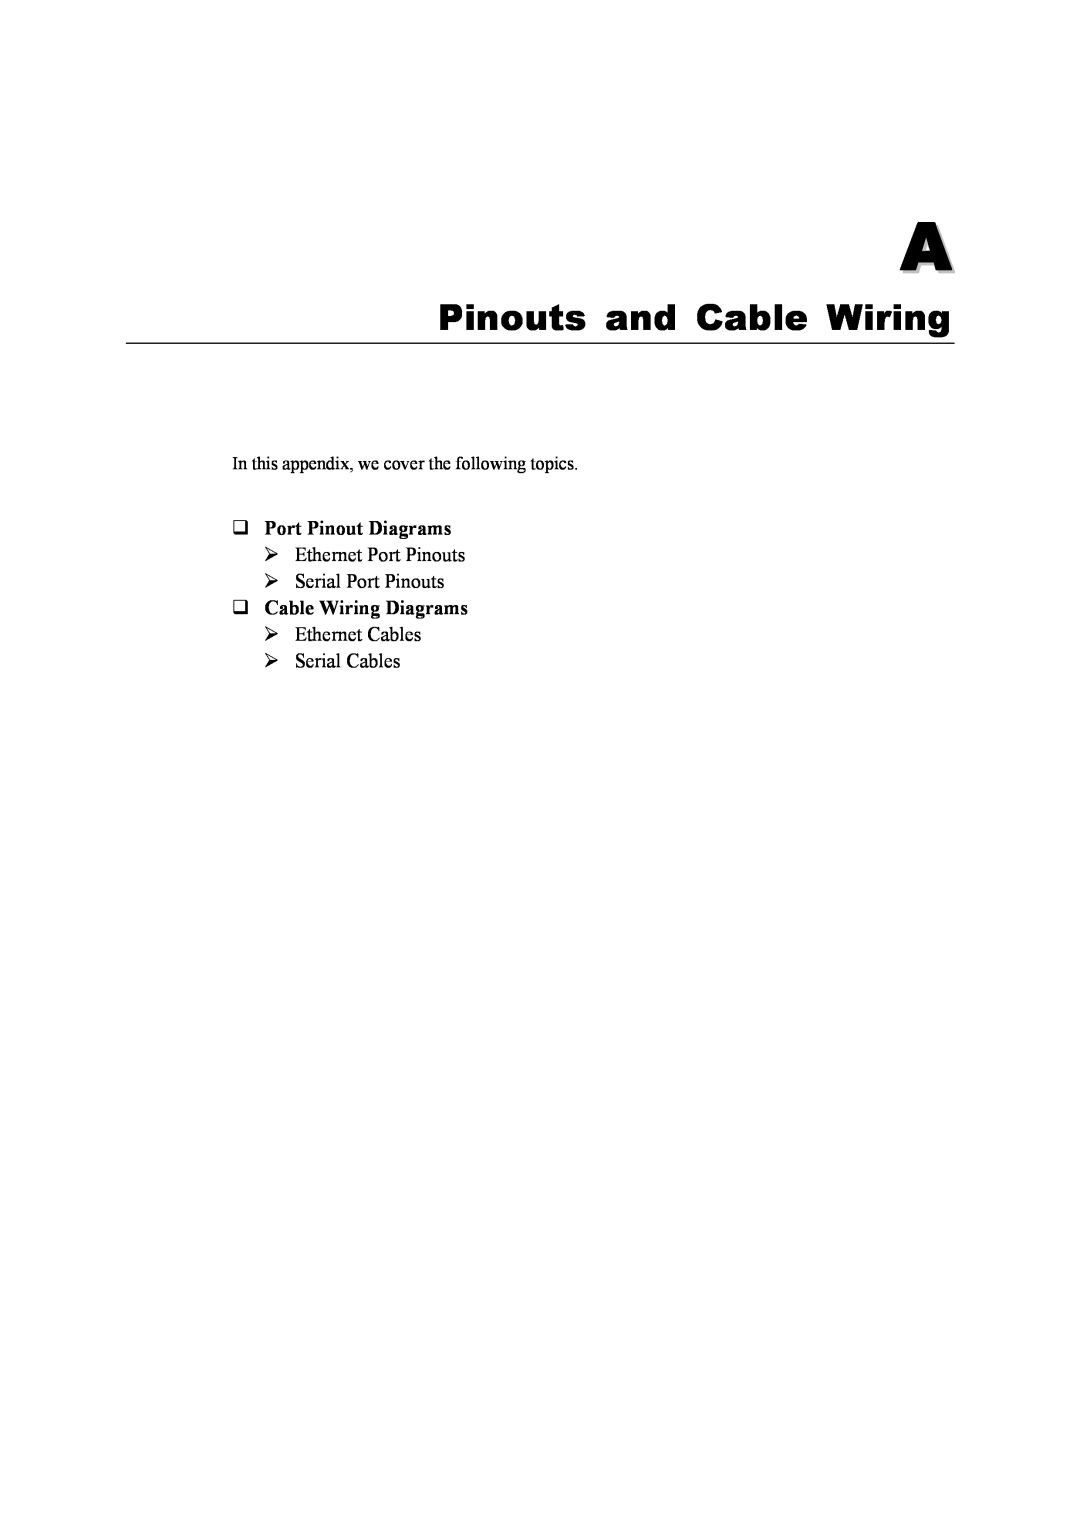 Moxa Technologies 5400 Series user manual Pinouts and Cable Wiring, ‰ Port Pinout Diagrams, ‰ Cable Wiring Diagrams 